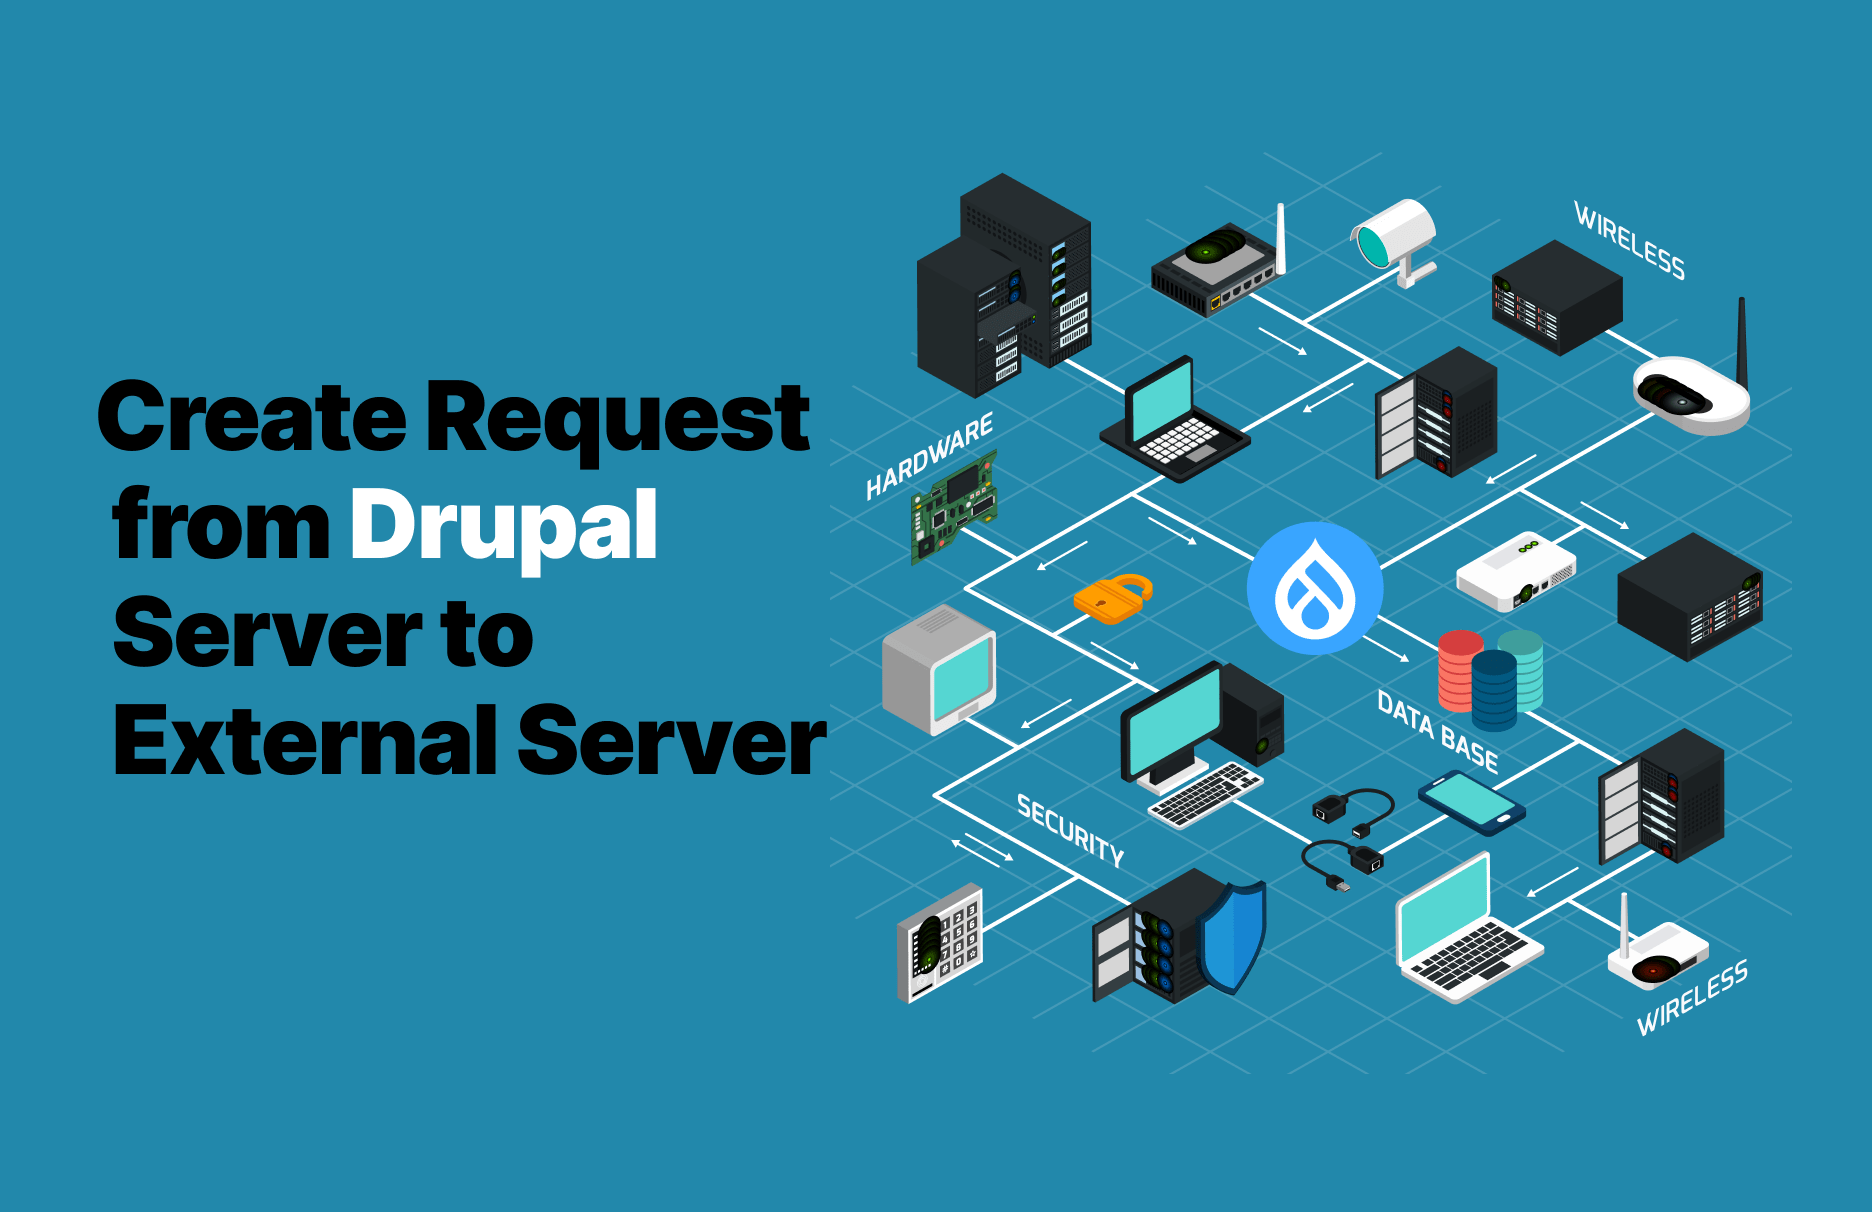 Create Request from Drupal Server to External Server